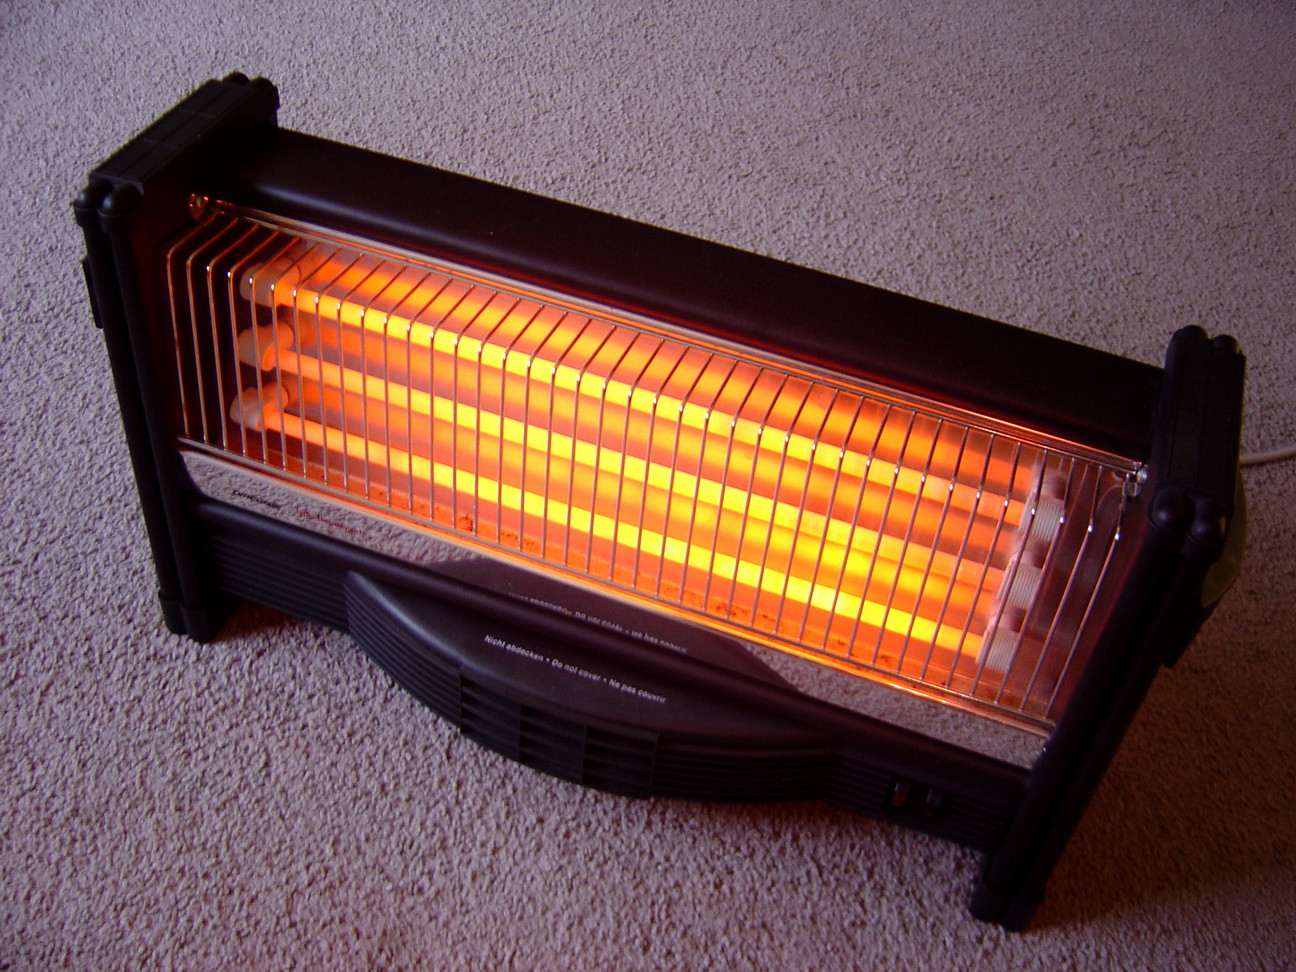 Is Portable Heater Really Useful?